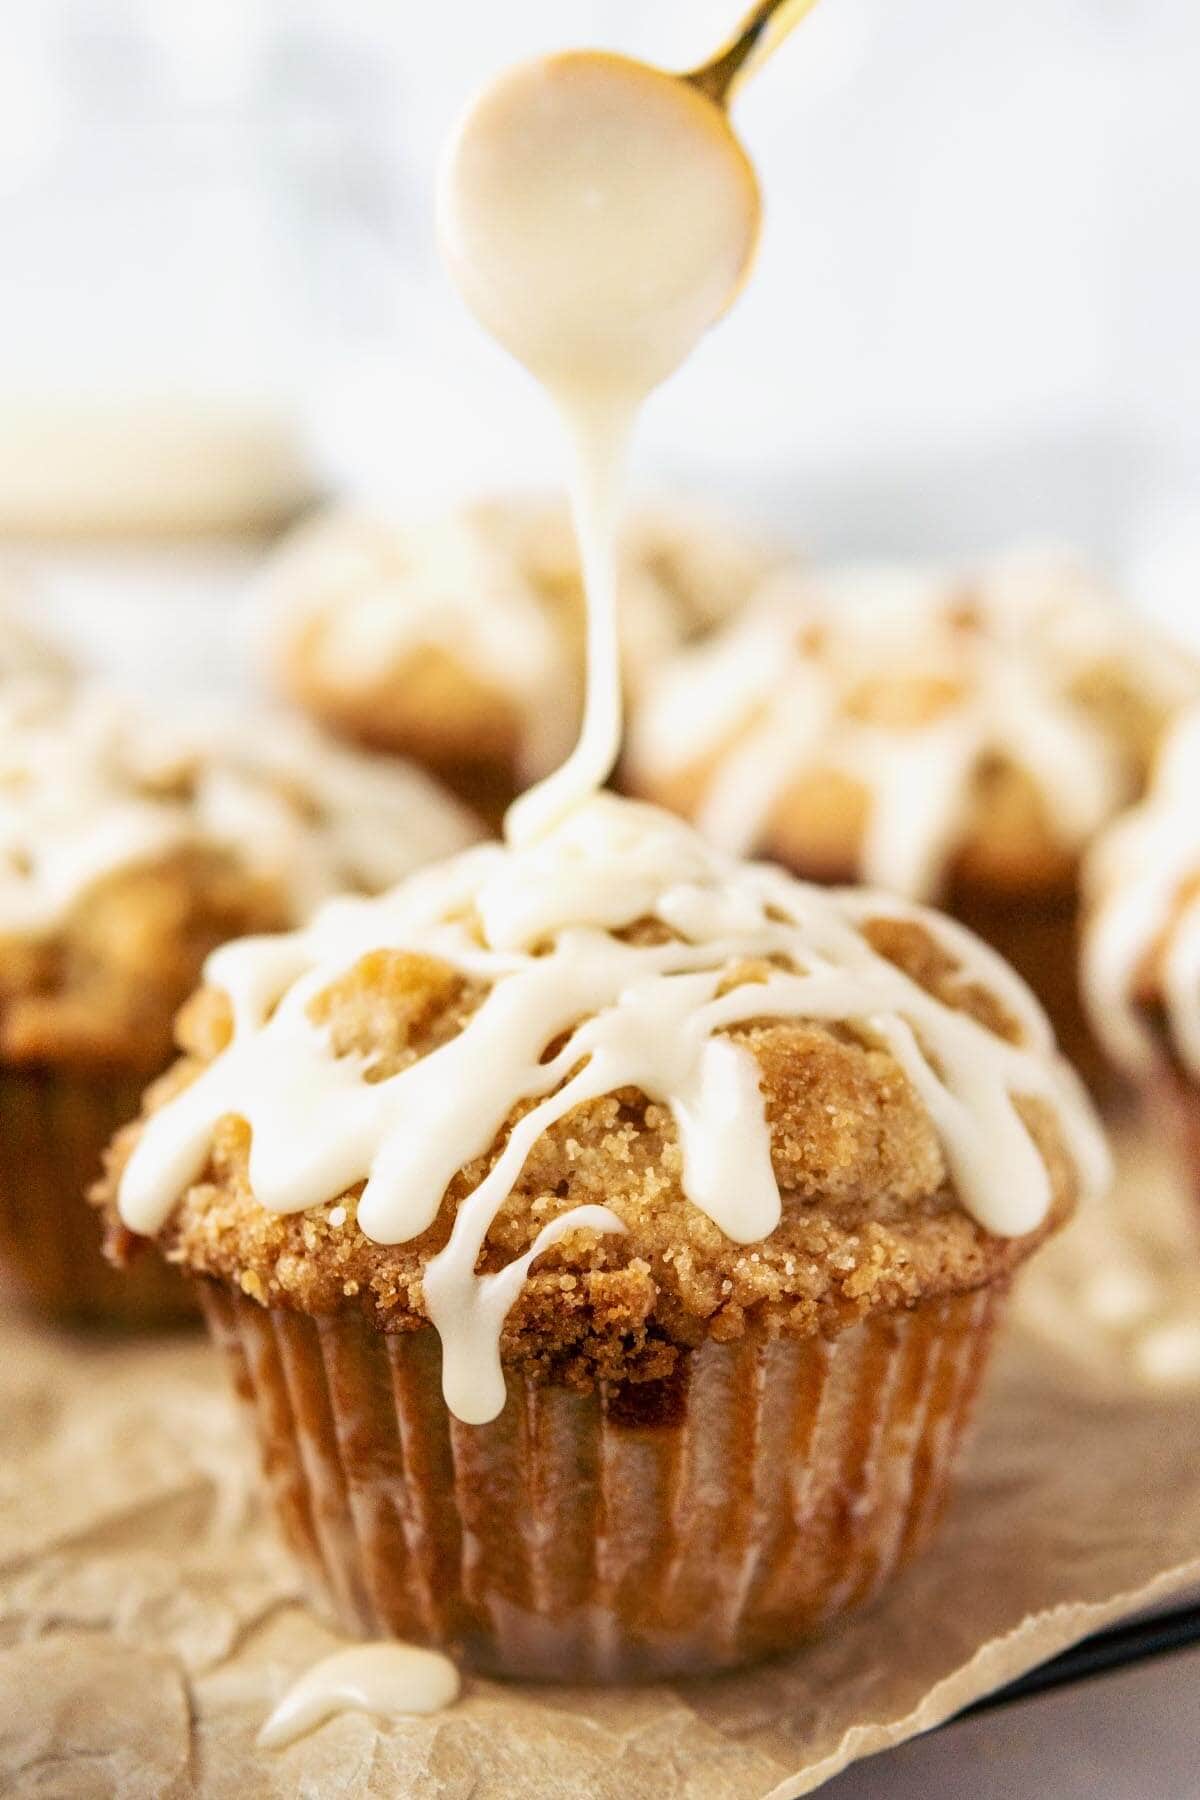 Oatmeal Chocolate Chip Muffins with Streusel Topping and icing being drizzled on top